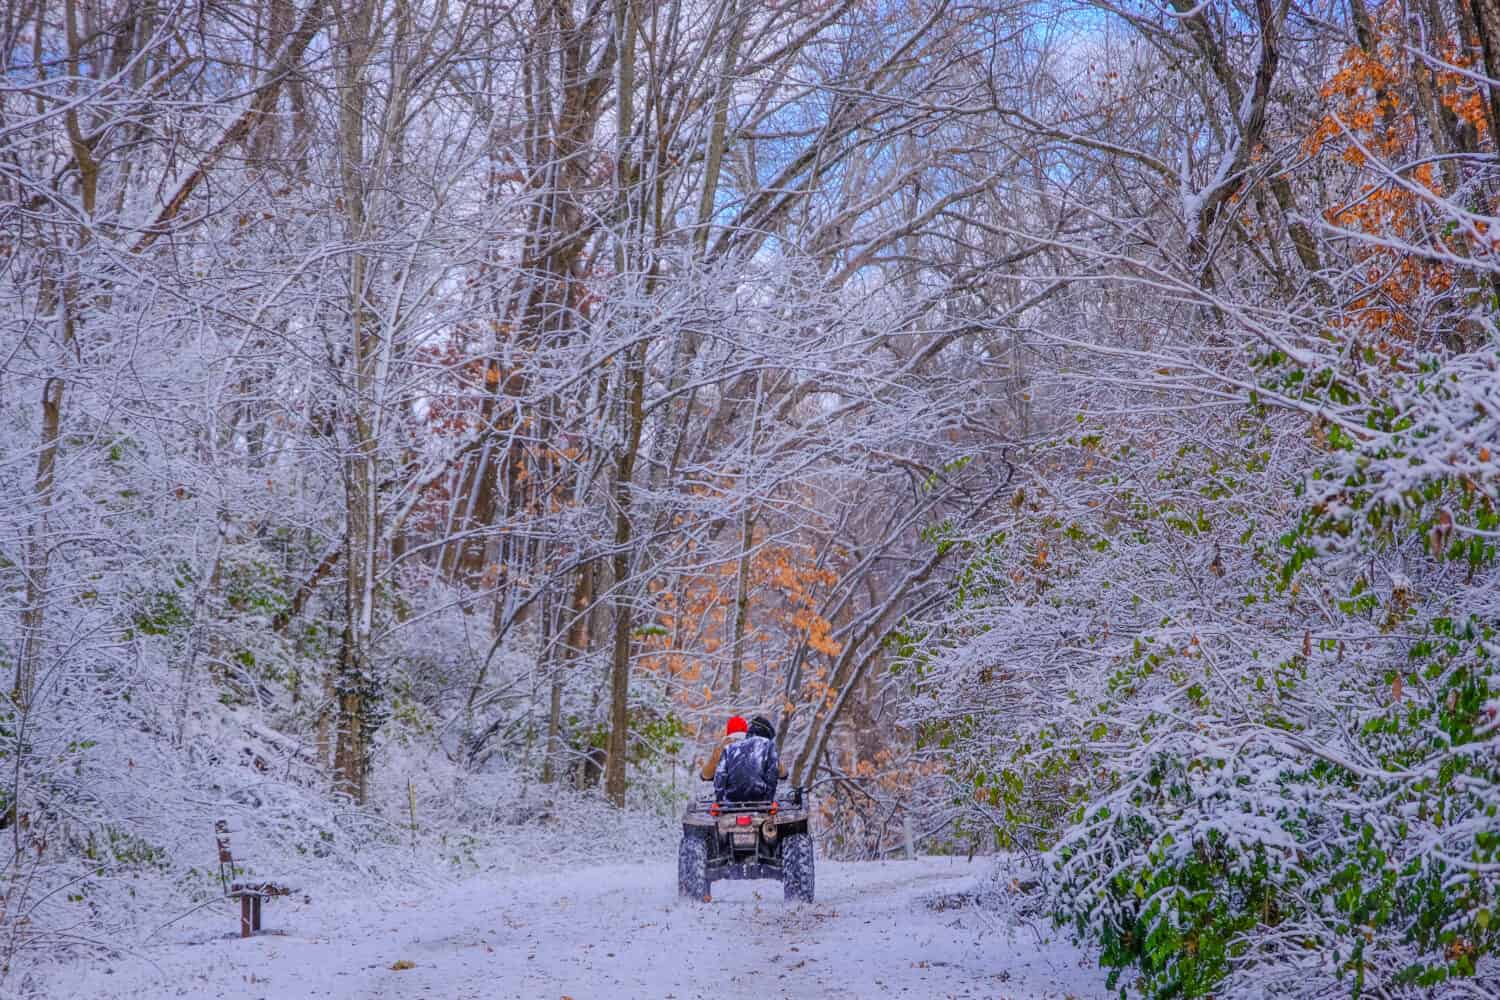 Man and woman driving all terrain vehicle along snow covered trail through beautiful snowy woods in Missouri, Midwest